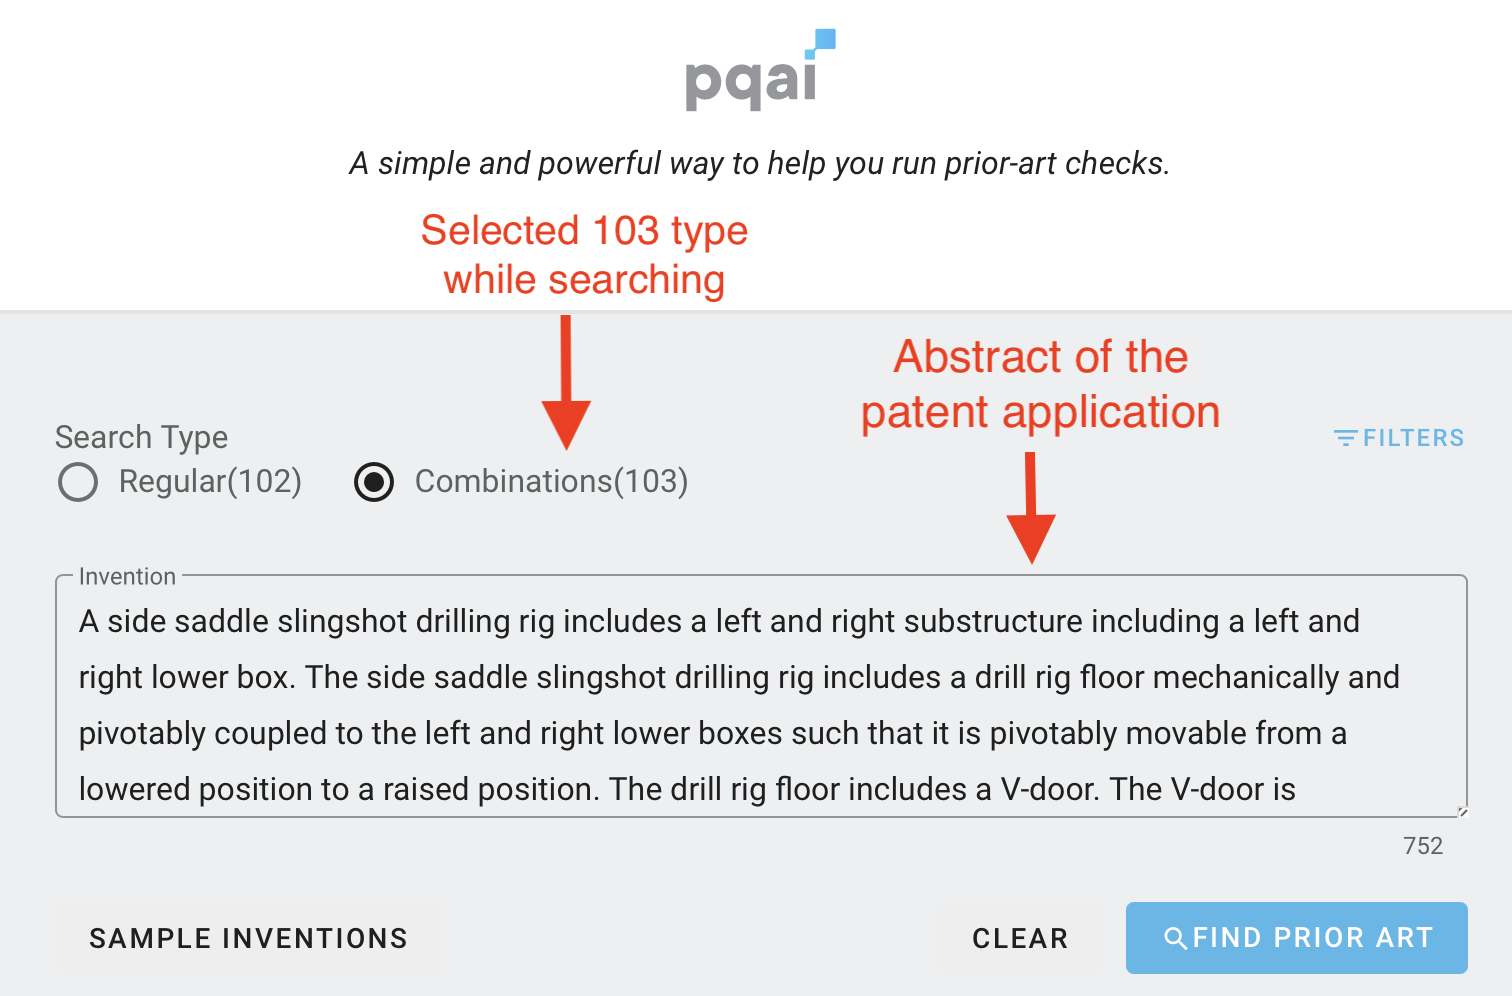 Avoid 103 type rejection by conducting combinational prior art search using PQAI

Snapshot from PQAI